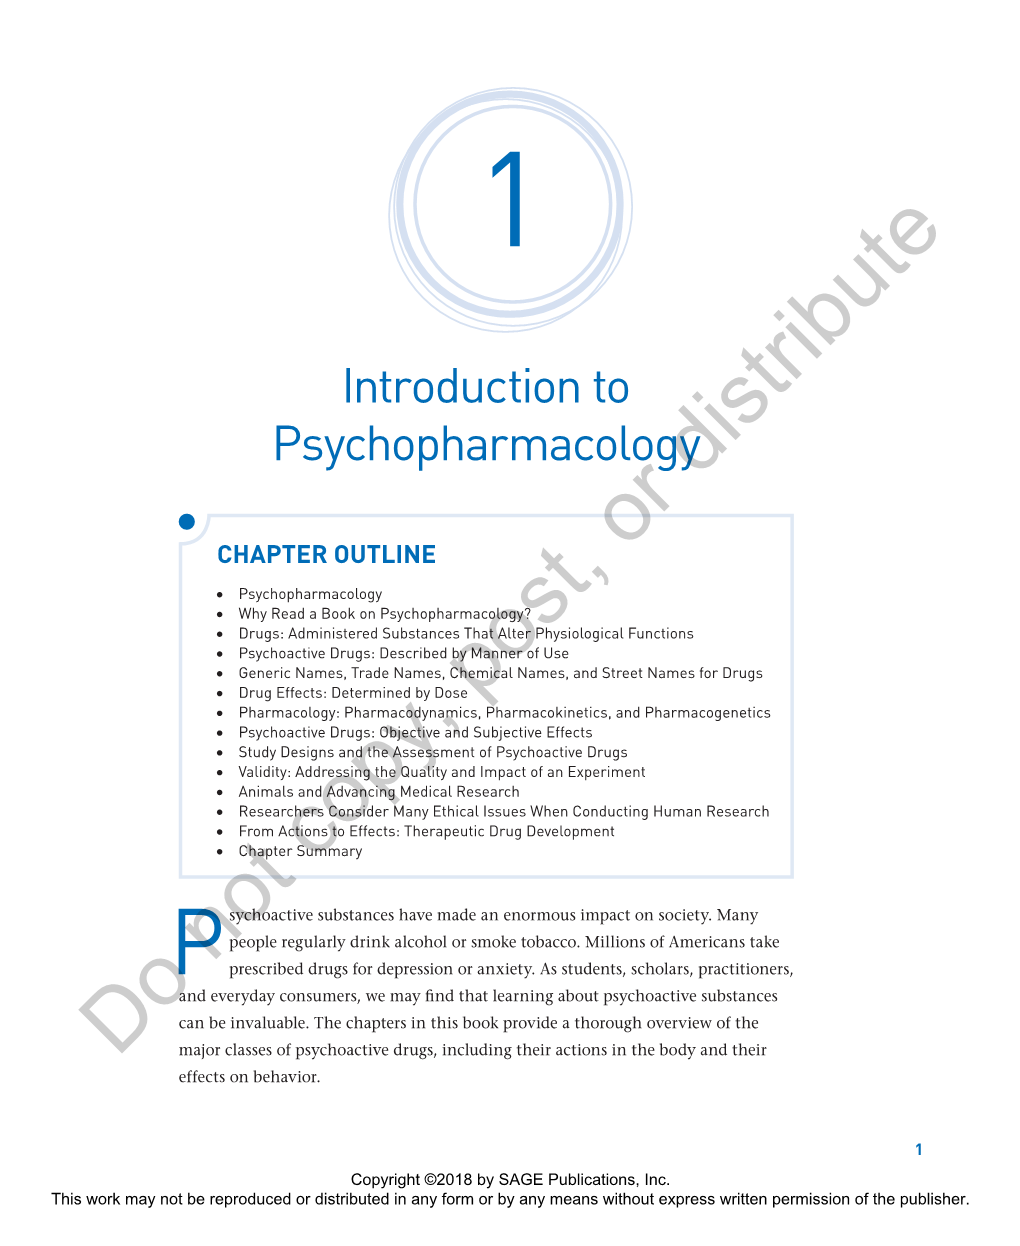 Introduction to Psychopharmacology